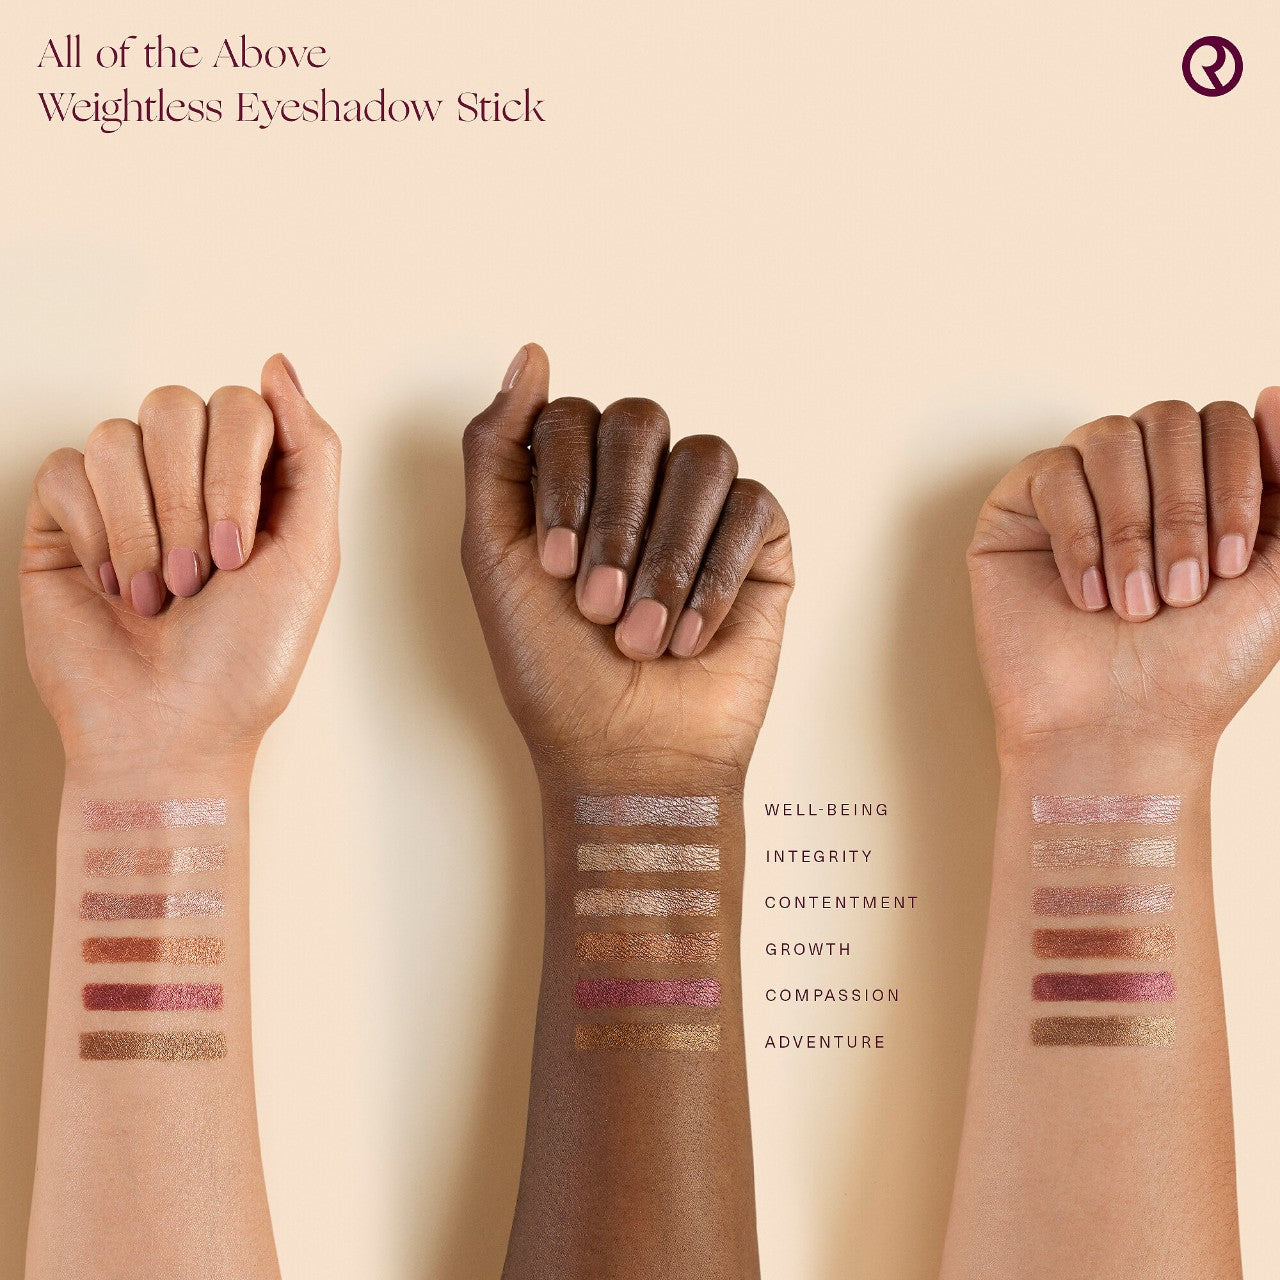 All Of The Above Weightless Eyeshadow Stick - Integrity